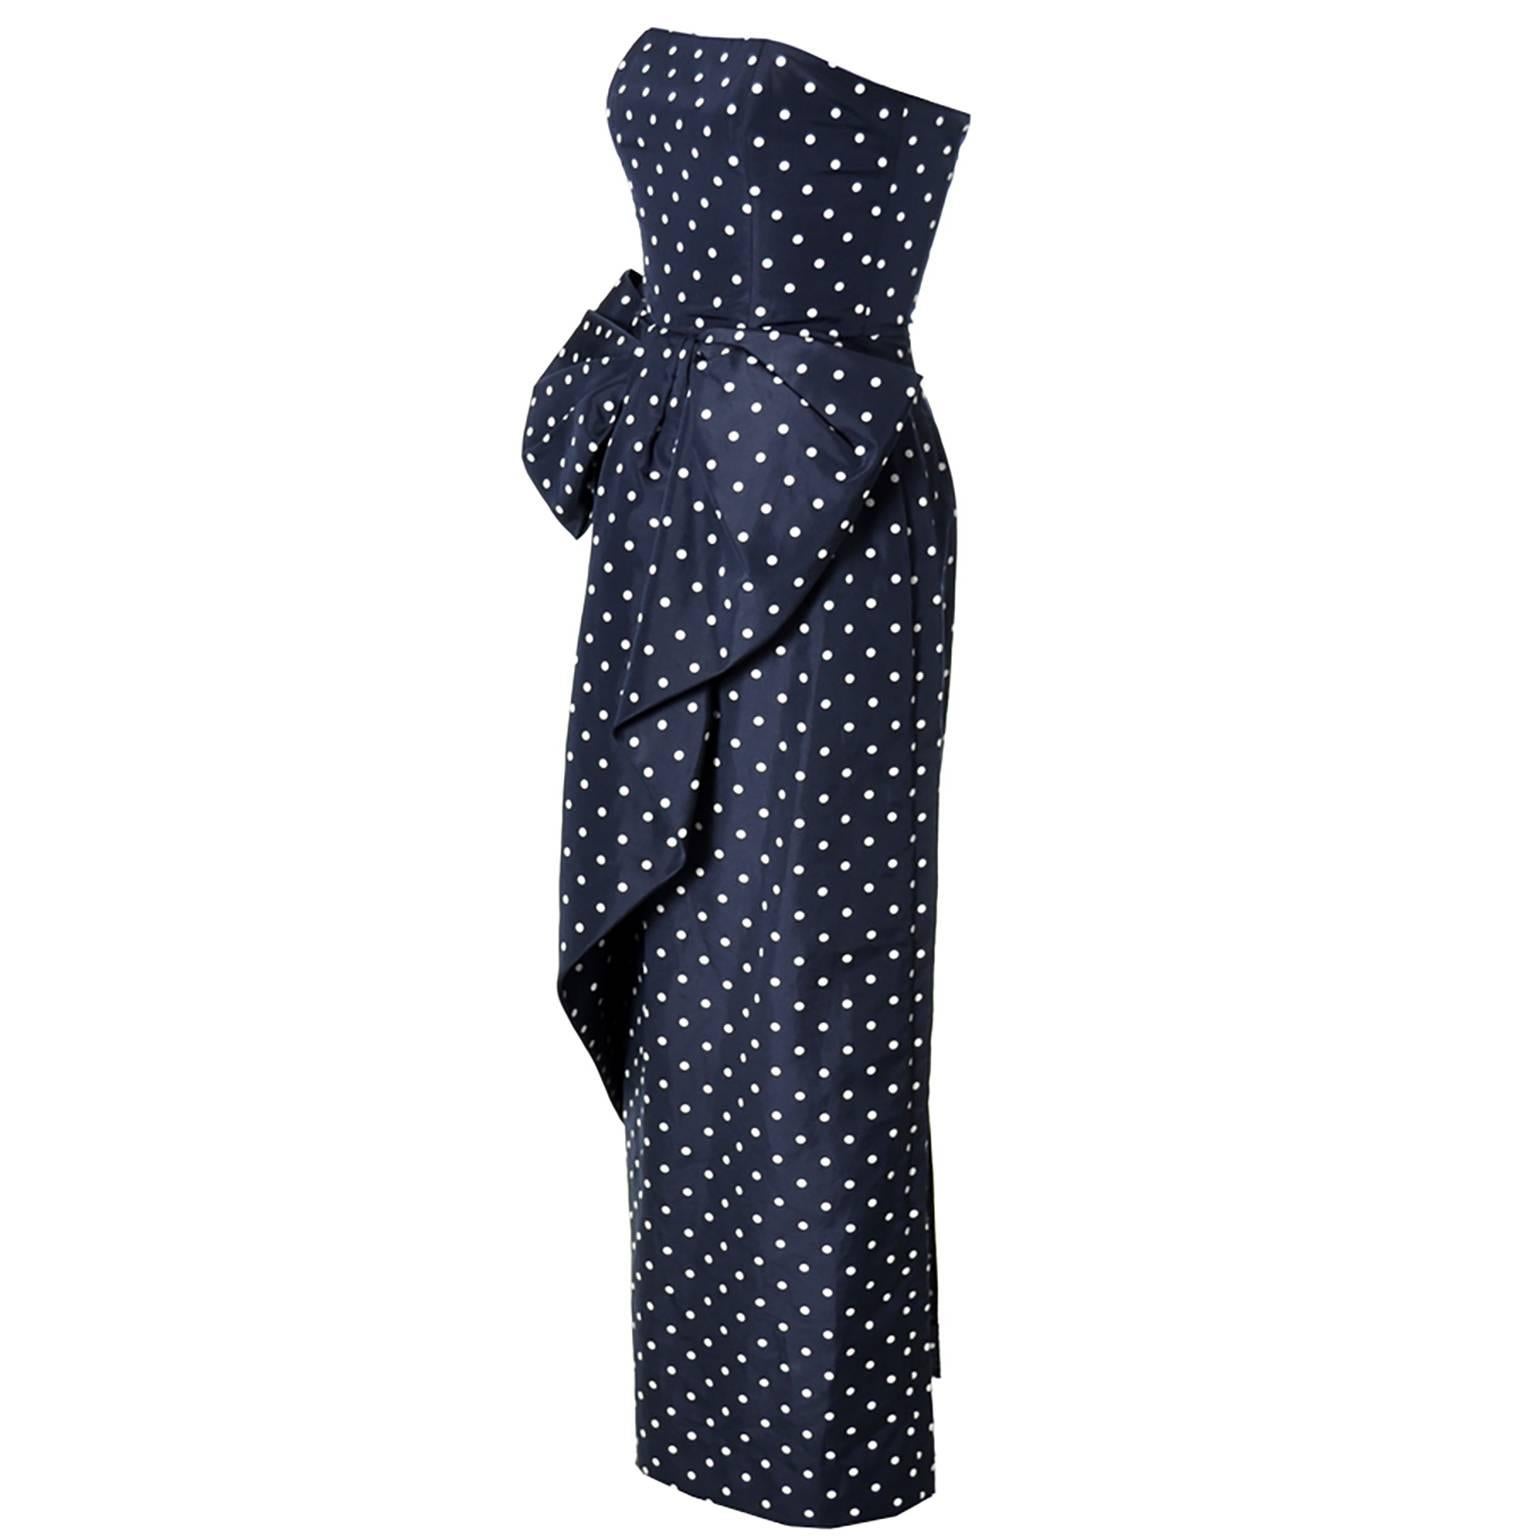 This strapless navy blue vintage dress with white polka dots is from Victor Costa.  This is a great 80's vintage dress with gorgeous front bow and a back slit.  This dress is in excellent condition and closes in the back with a zipper and hook and